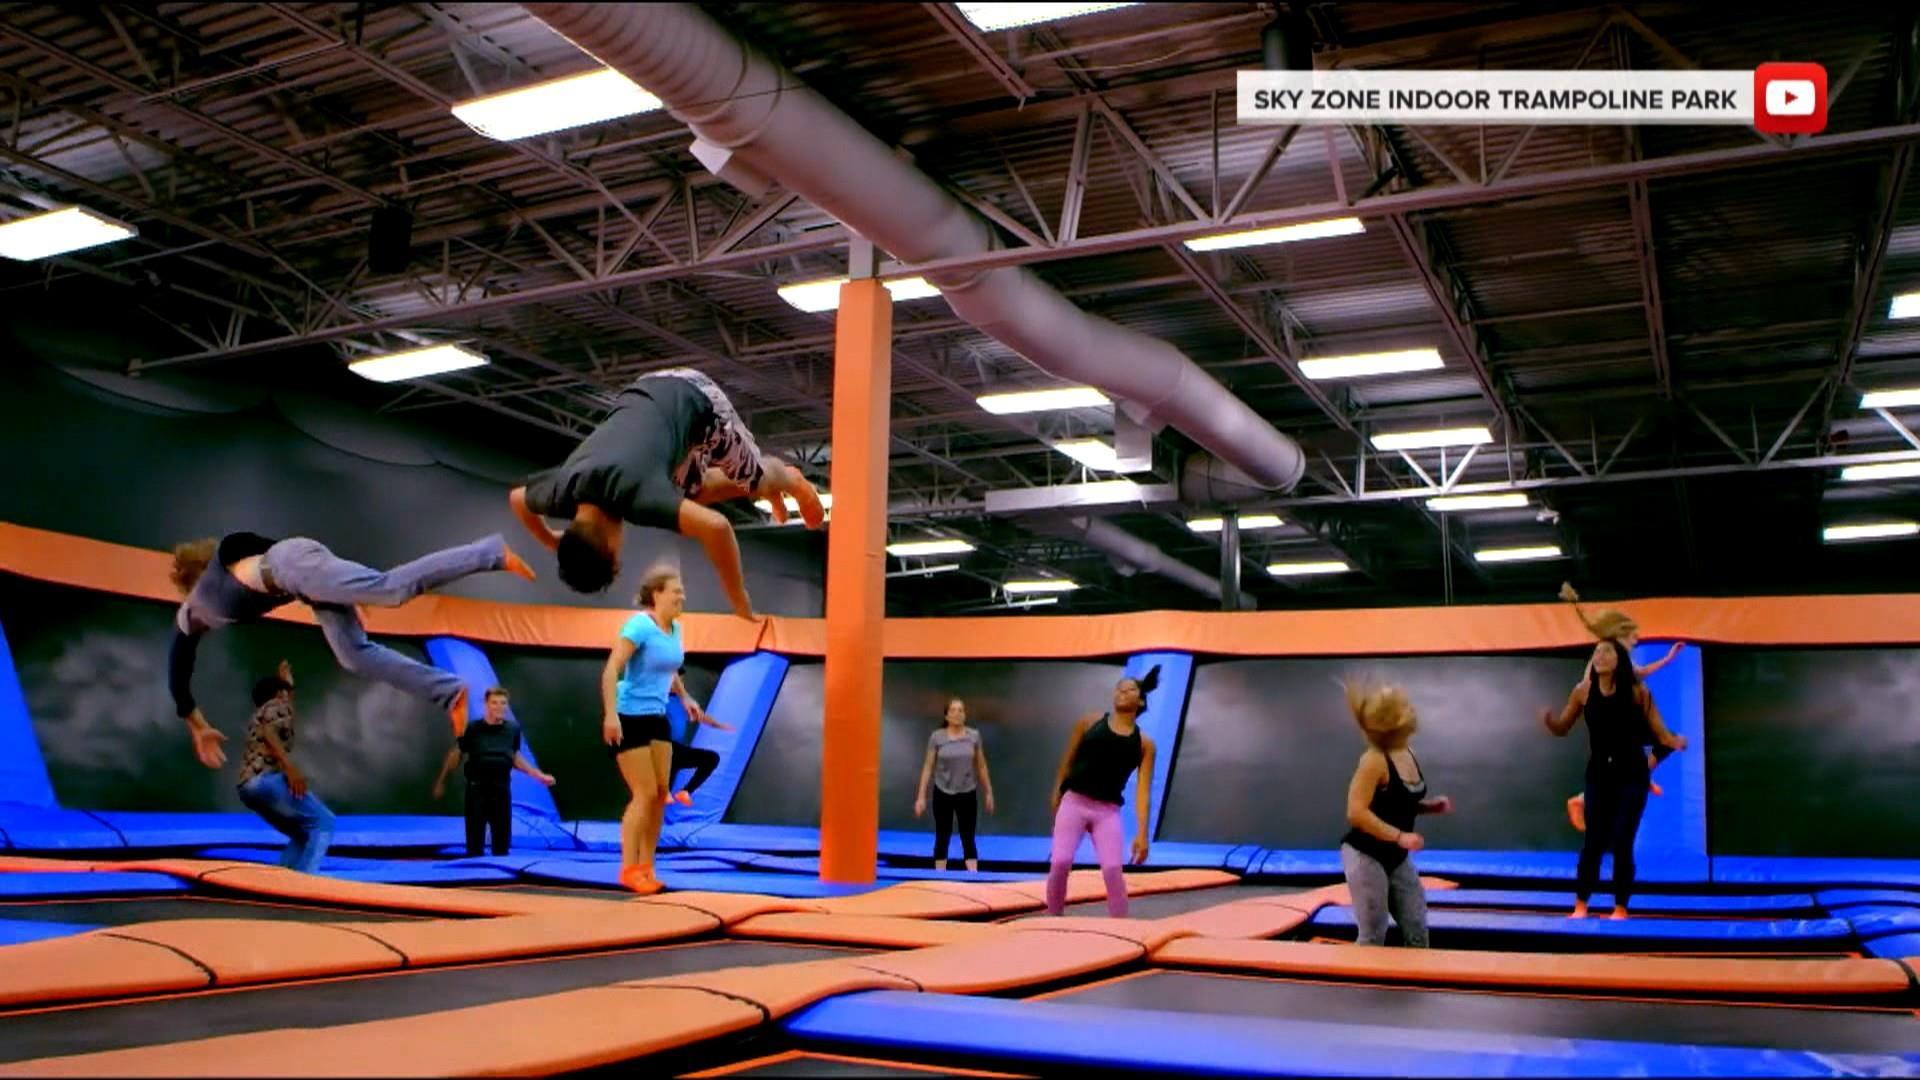 Trampoline Parks for families